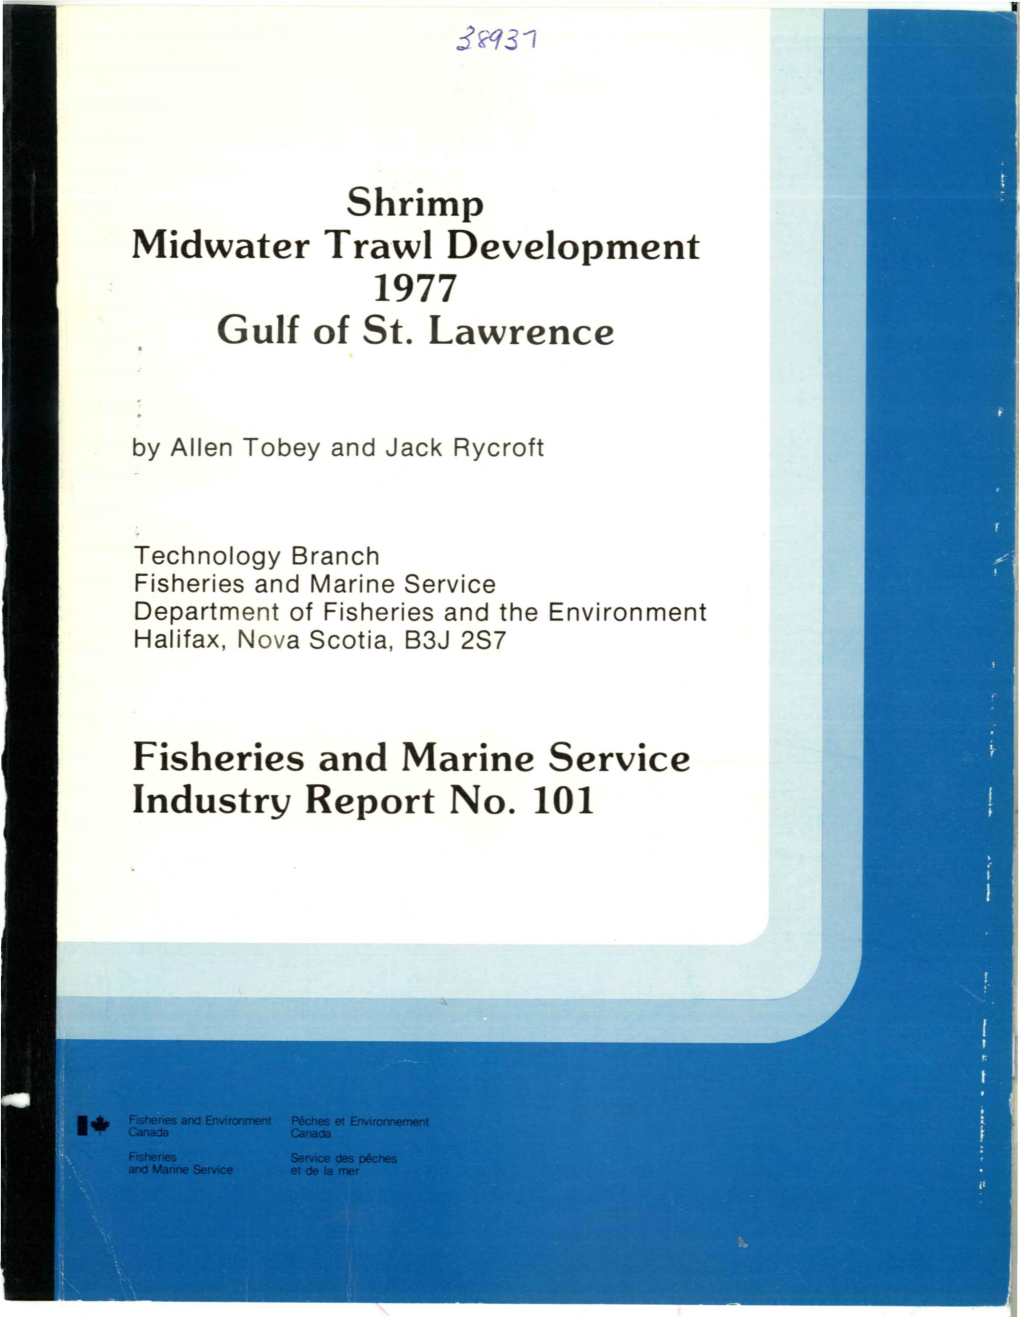 Shridlp Midwater Trawl Developdlent 1977 Gulf of St. Lawrence Fisheries